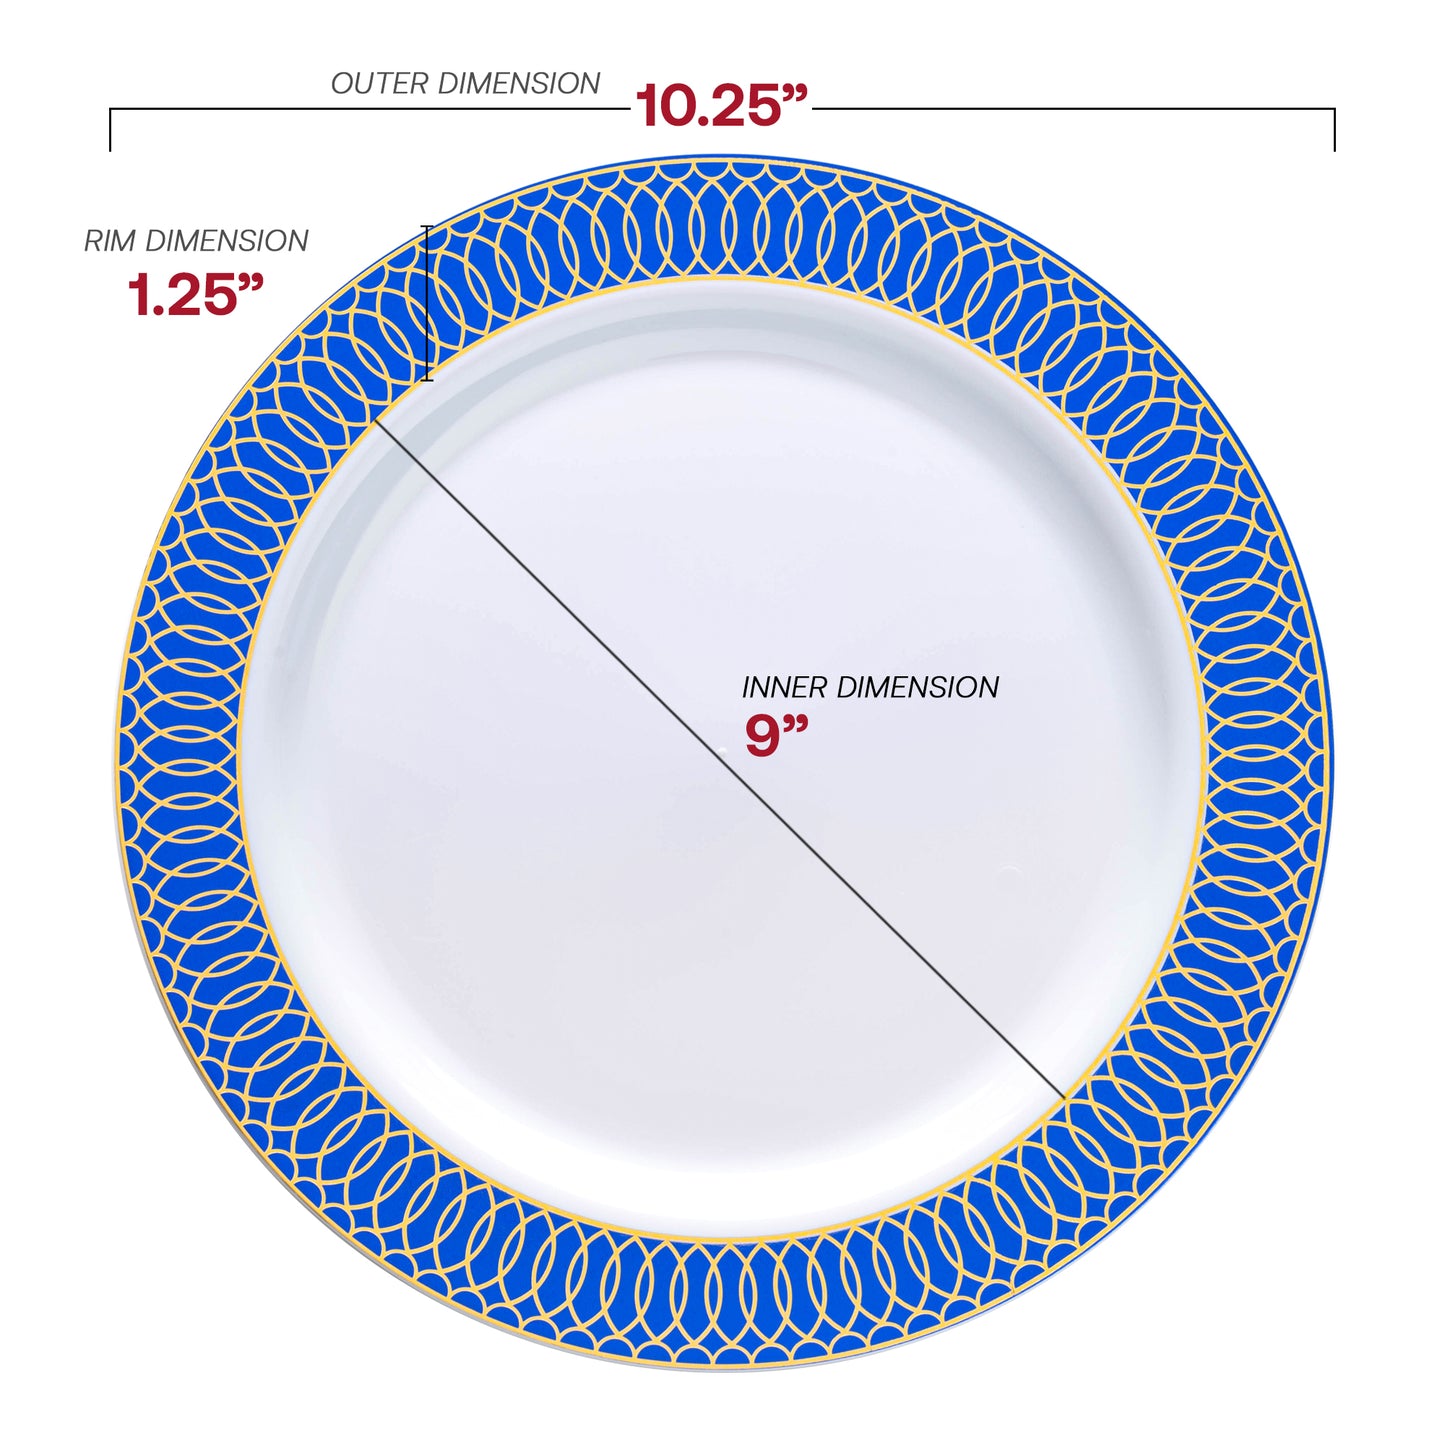 White with Gold Spiral on Blue Rim Plastic Dinner Plates (10.25") Dimension | The Kaya Collection